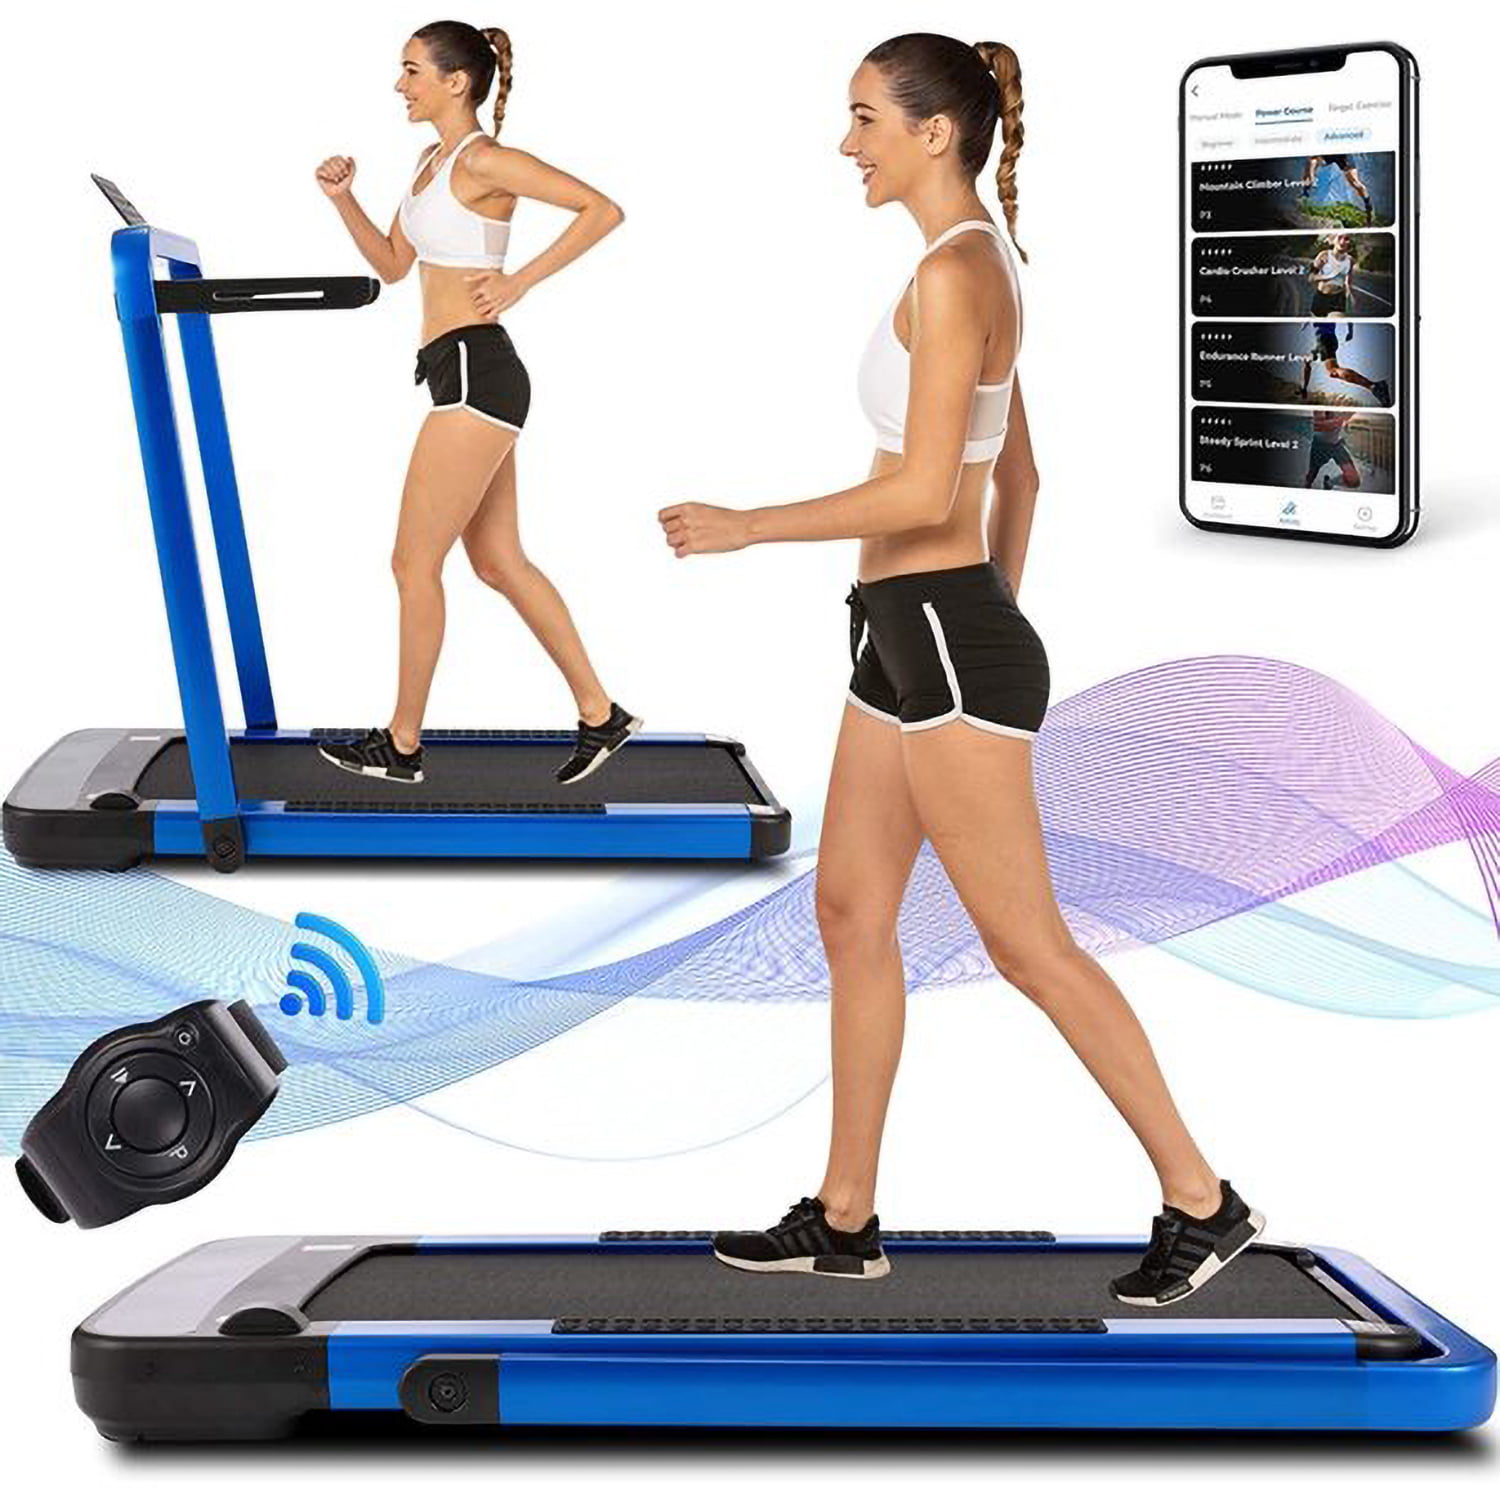 FUNMILY Treadmill for Home Folding Treadmills with Desk and Bluetooth Speaker 265 LBS Weight Capacity Portable Electric Treadmill Machine for Running Walking Workout 